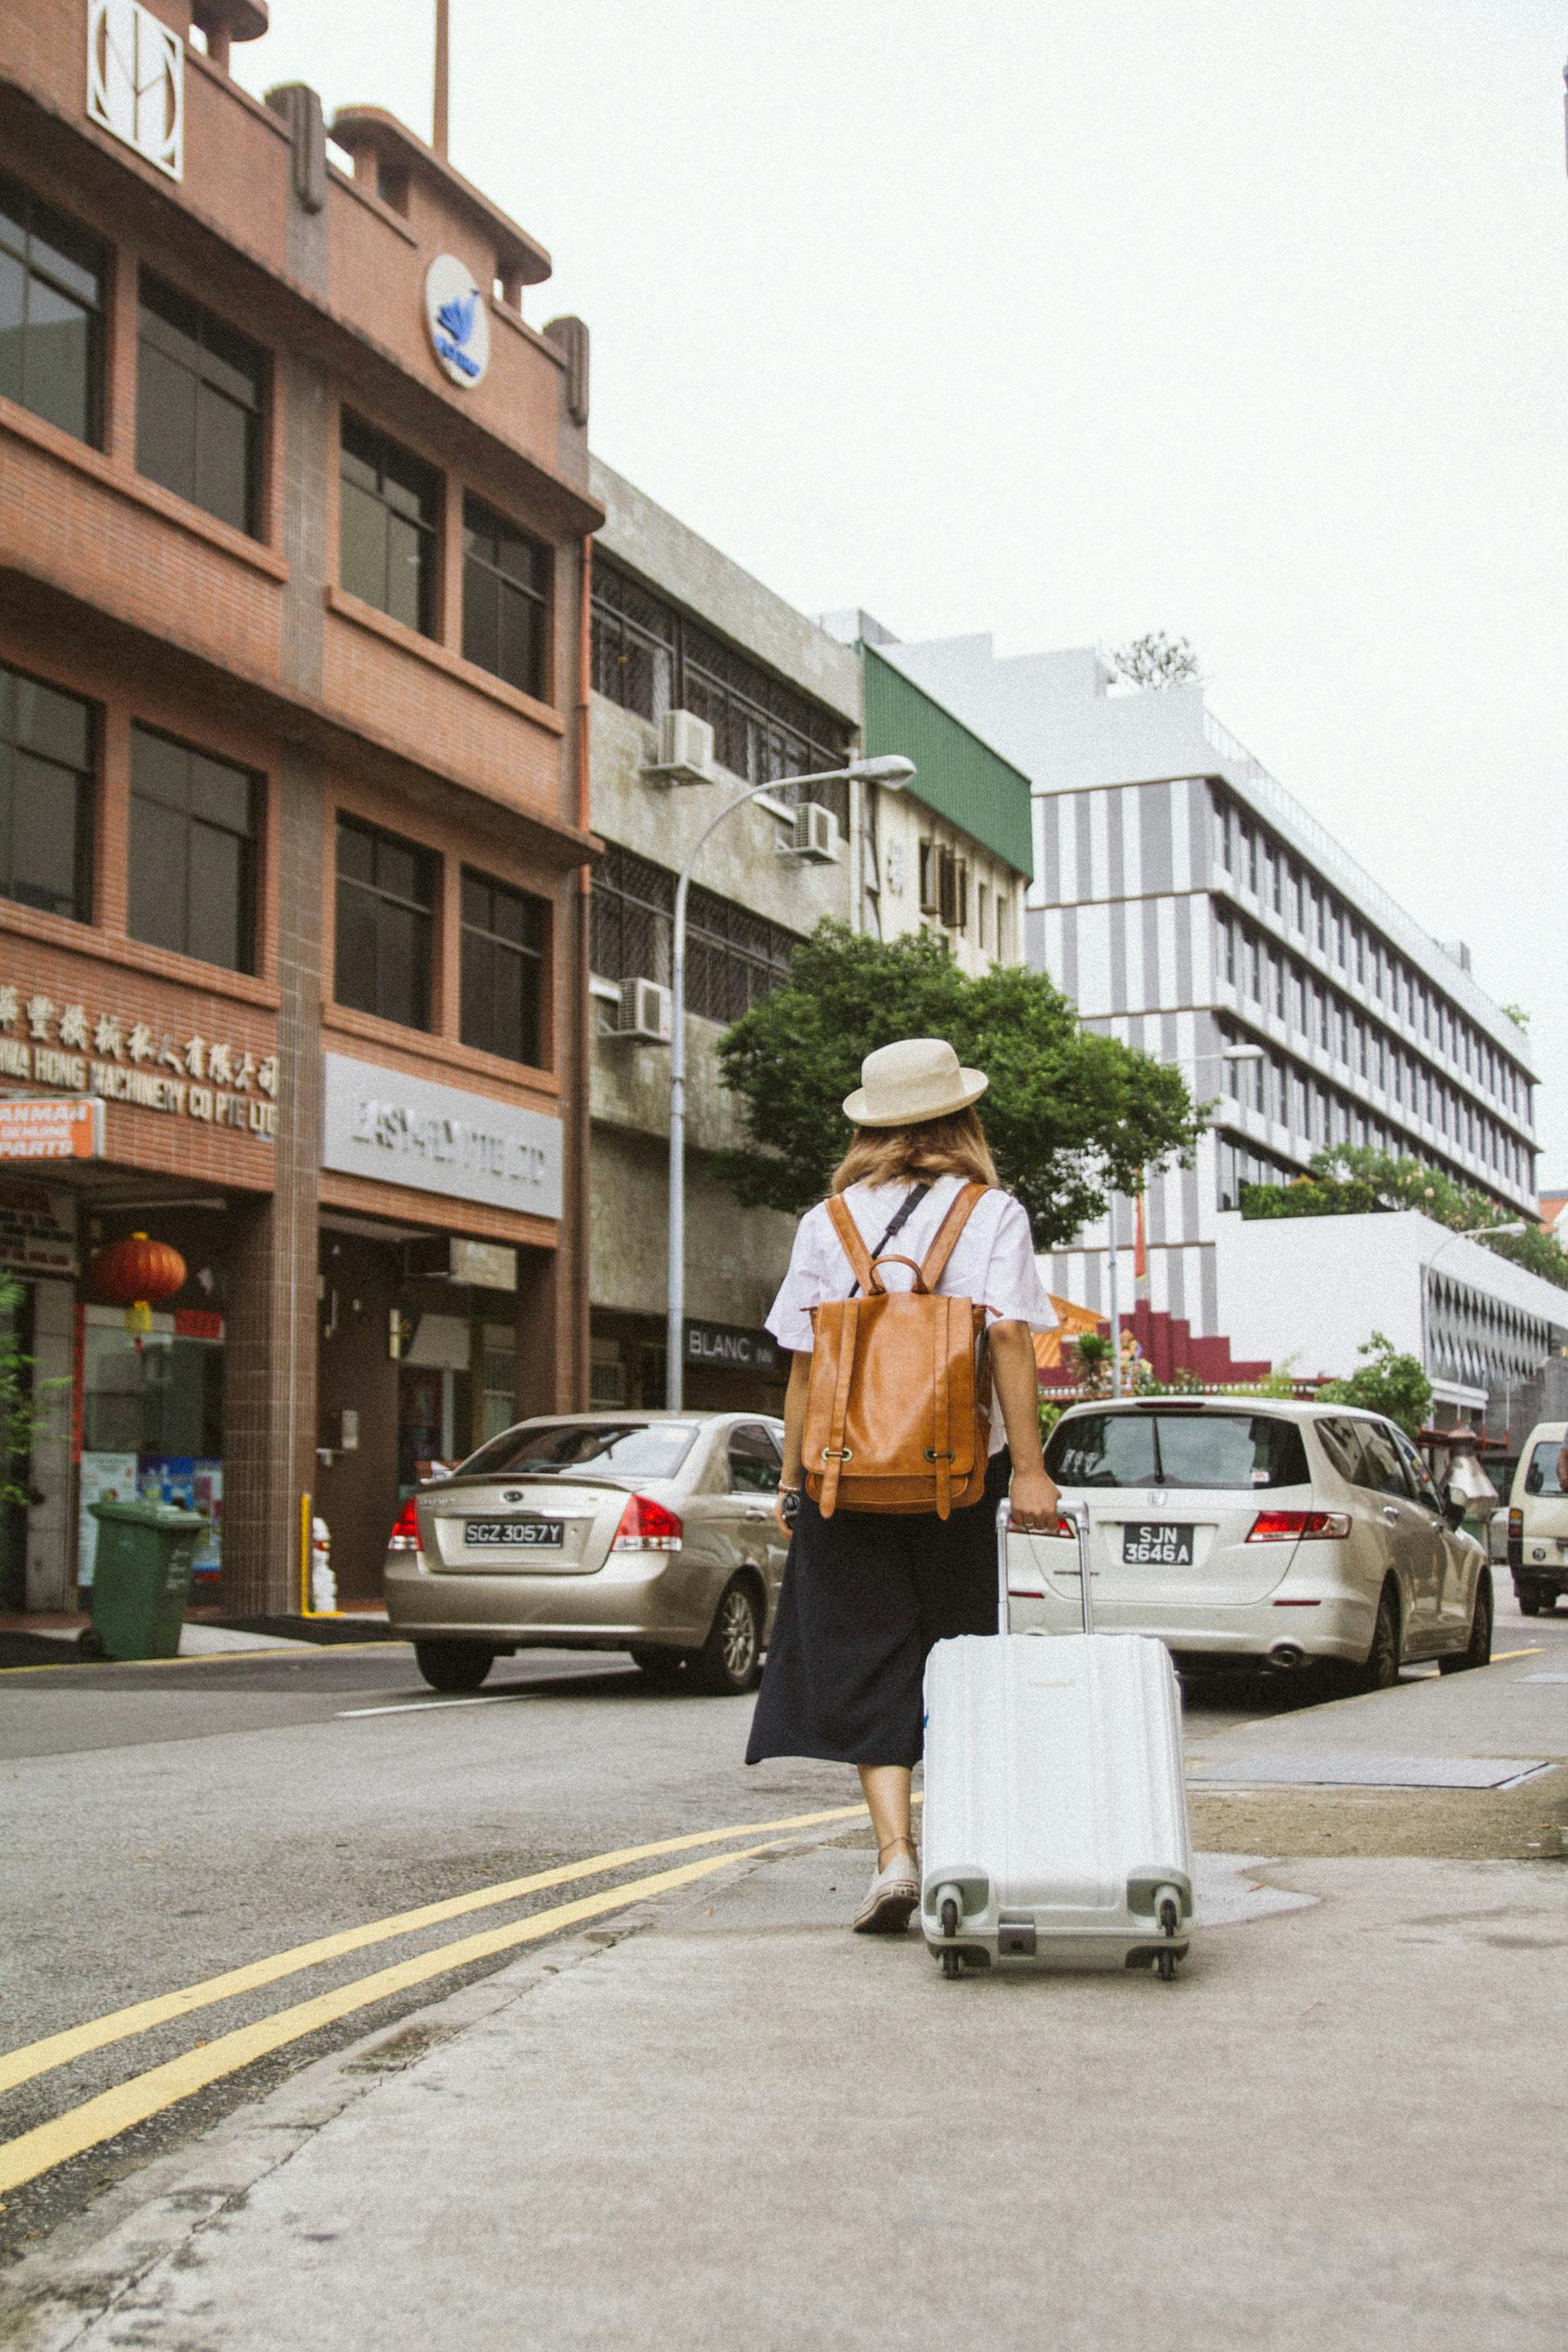 Young woman wheeling a suitcase | Source: Pexels